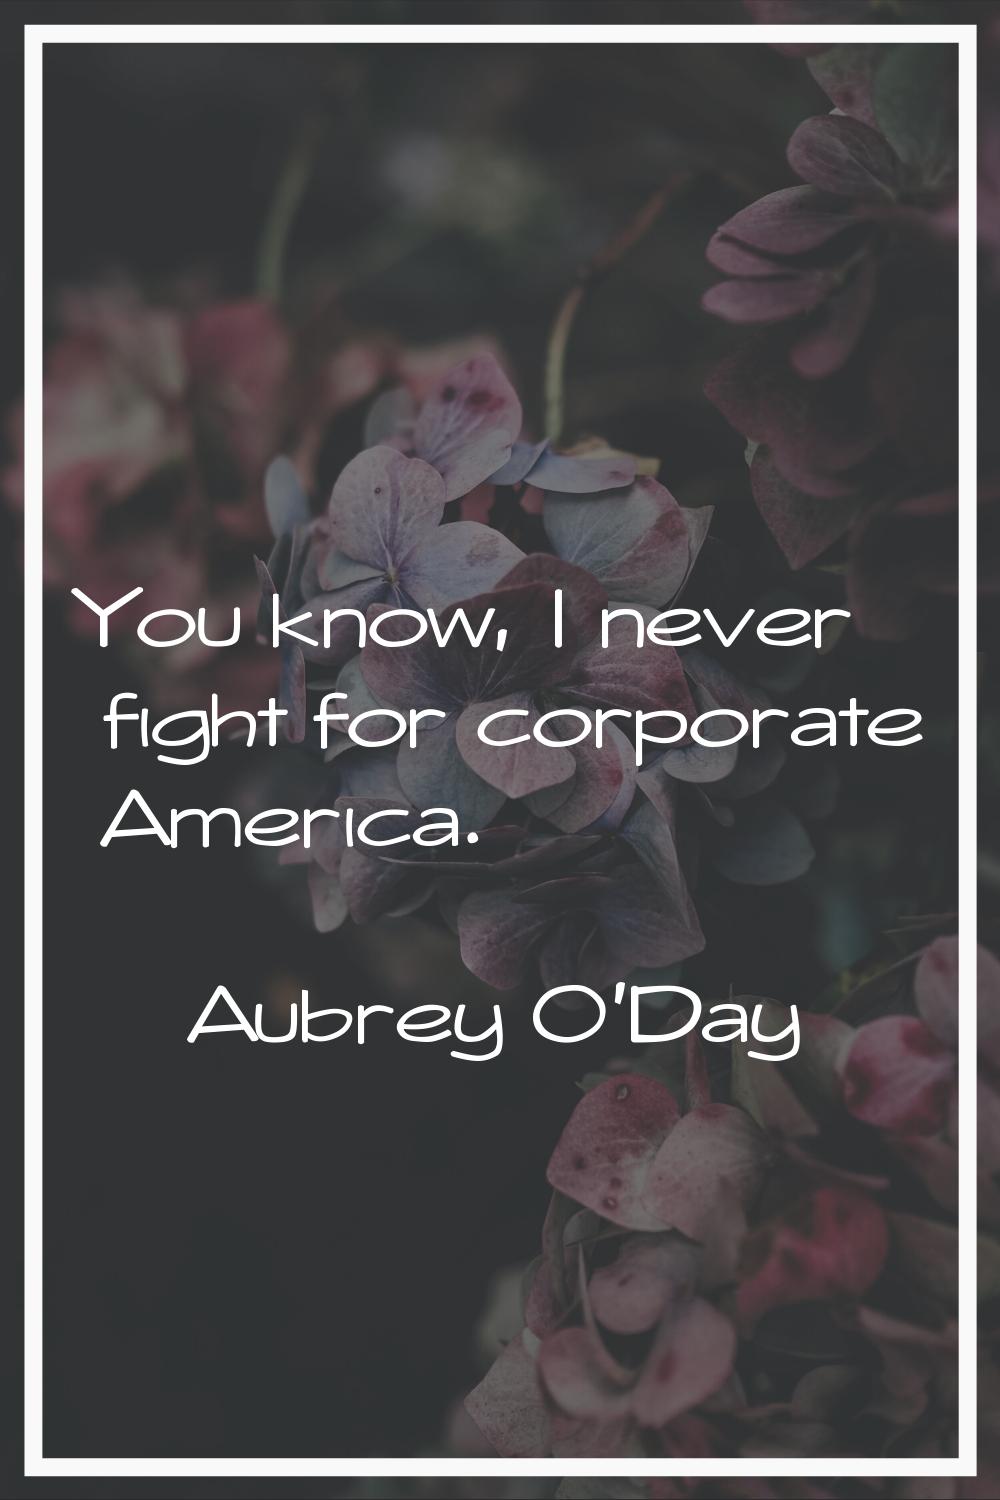 You know, I never fight for corporate America.